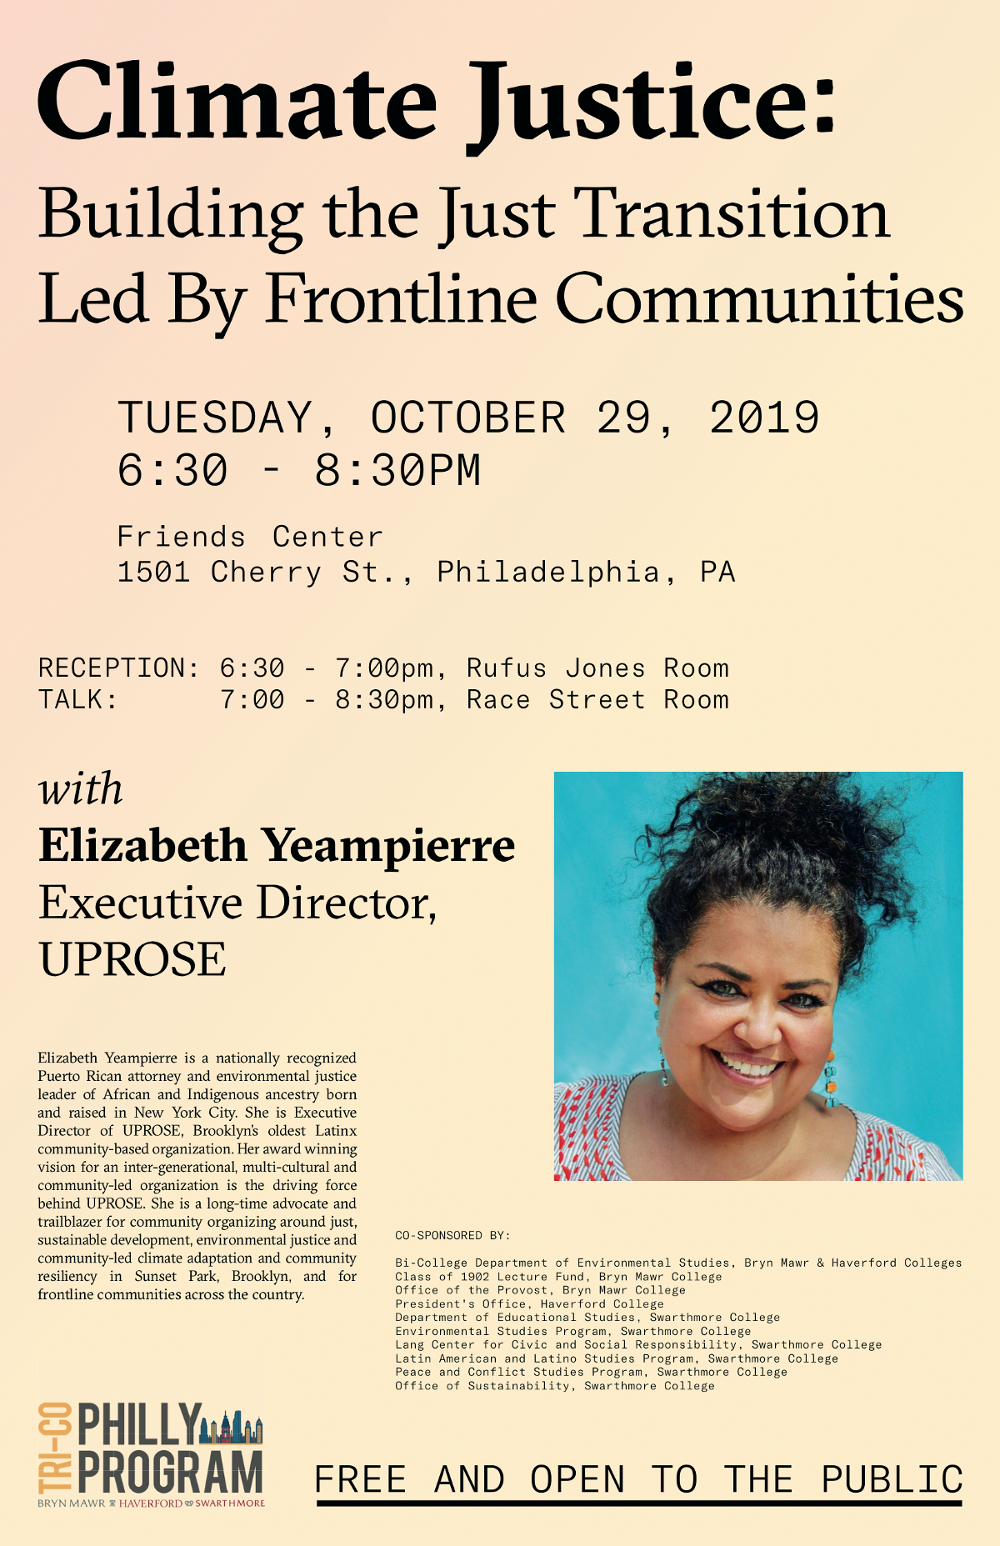 Flyer for talk by Elizabeth Yeampierre on Climate Justice at Friends Center, October 29, 2019